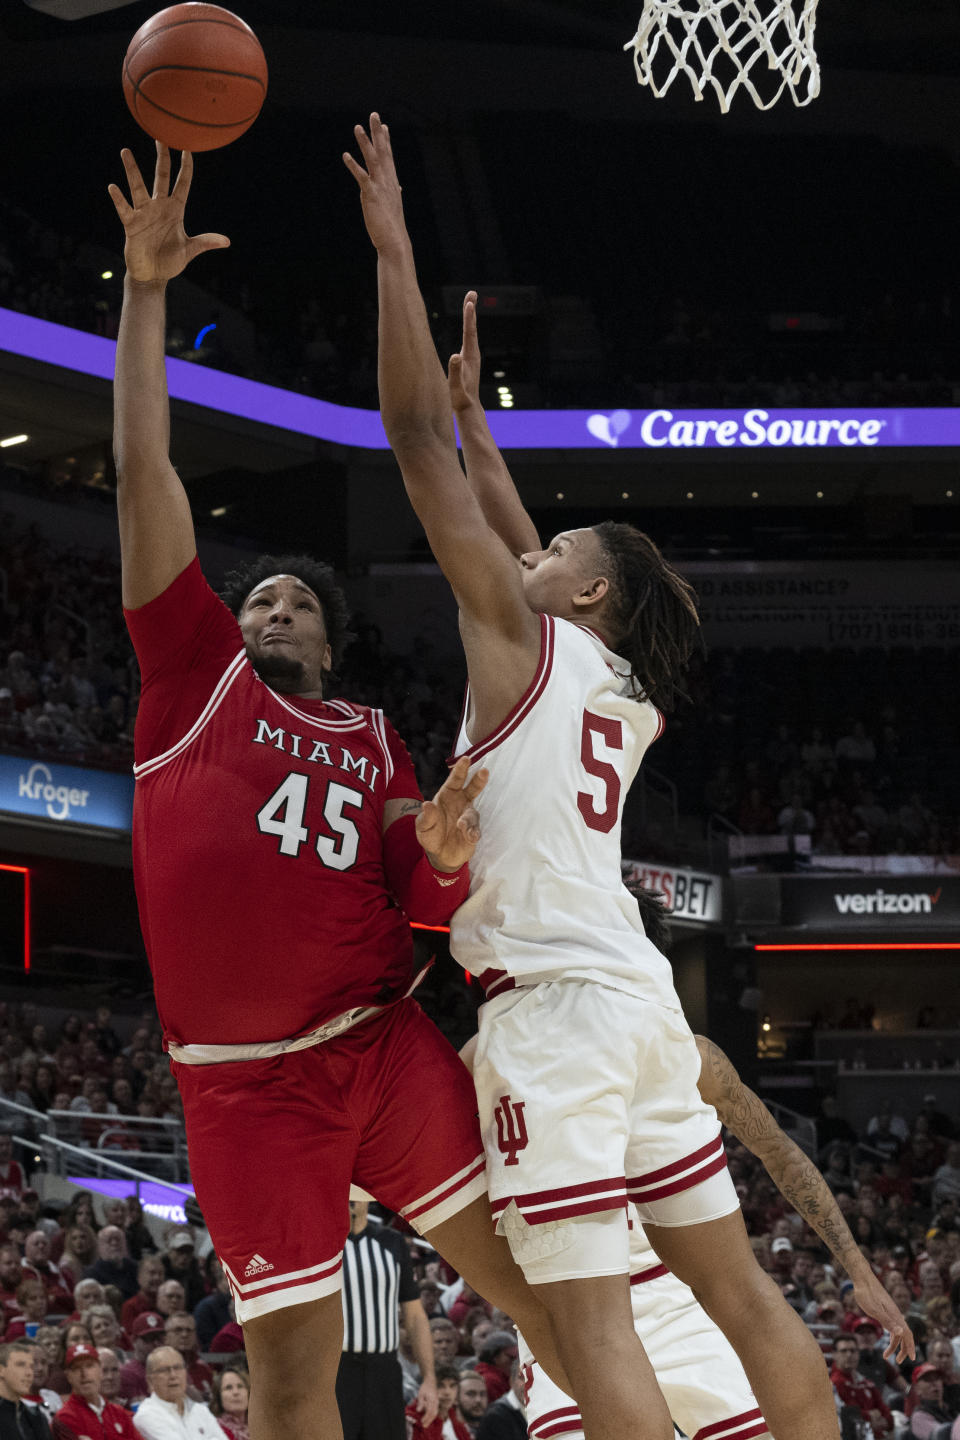 Miami (Ohio) forward Anderson Mirambeaux (45) shoots over Indiana forward Malik Reneau (5) during the first half of an NCAA college basketball game, Sunday, Nov. 20, 2022, in Indianapolis. (AP Photo/Marc Lebryk)